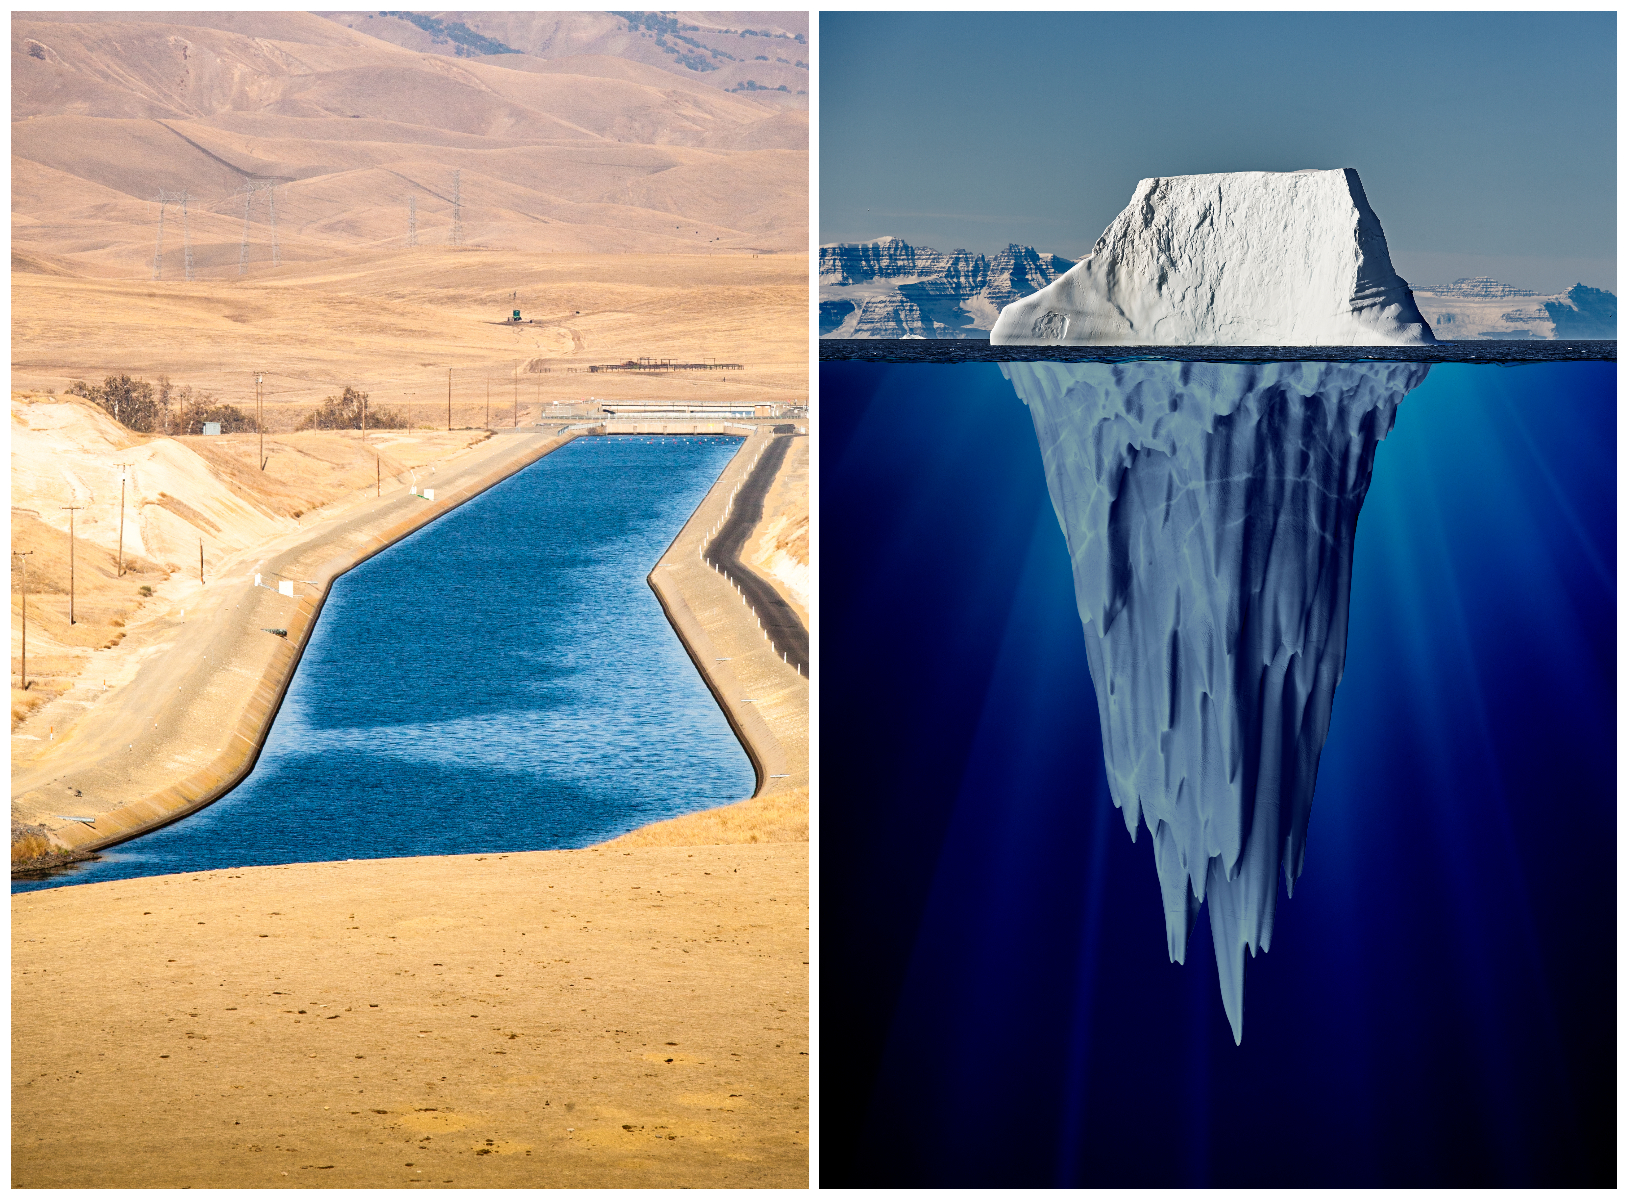 Americans Are Running Out of Water. A Towering Iceberg Could Be